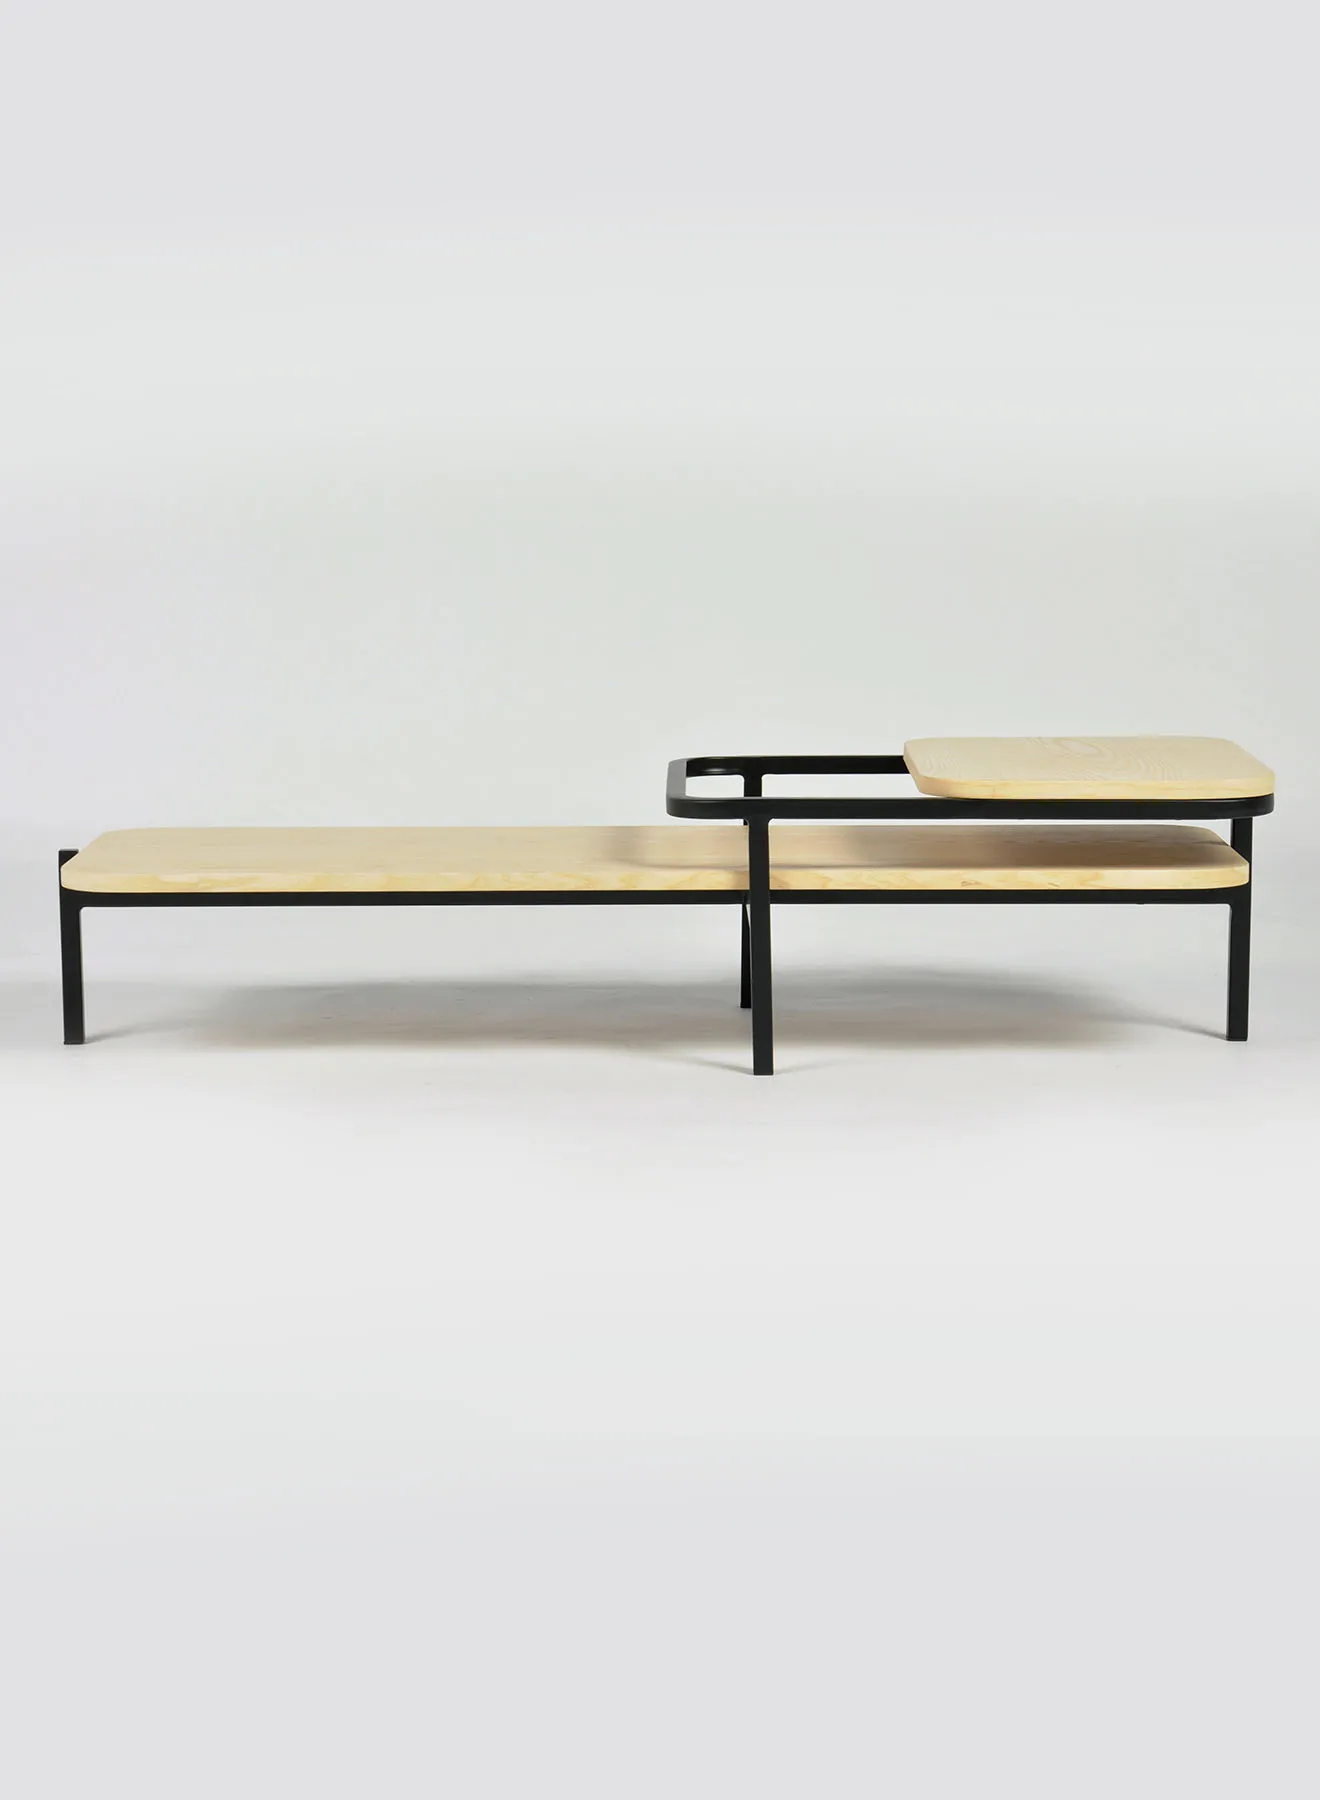 Switch Coffee Table Used As Coffee Corner And Side Table In Natural Wood - Size 123 X 48 X 30